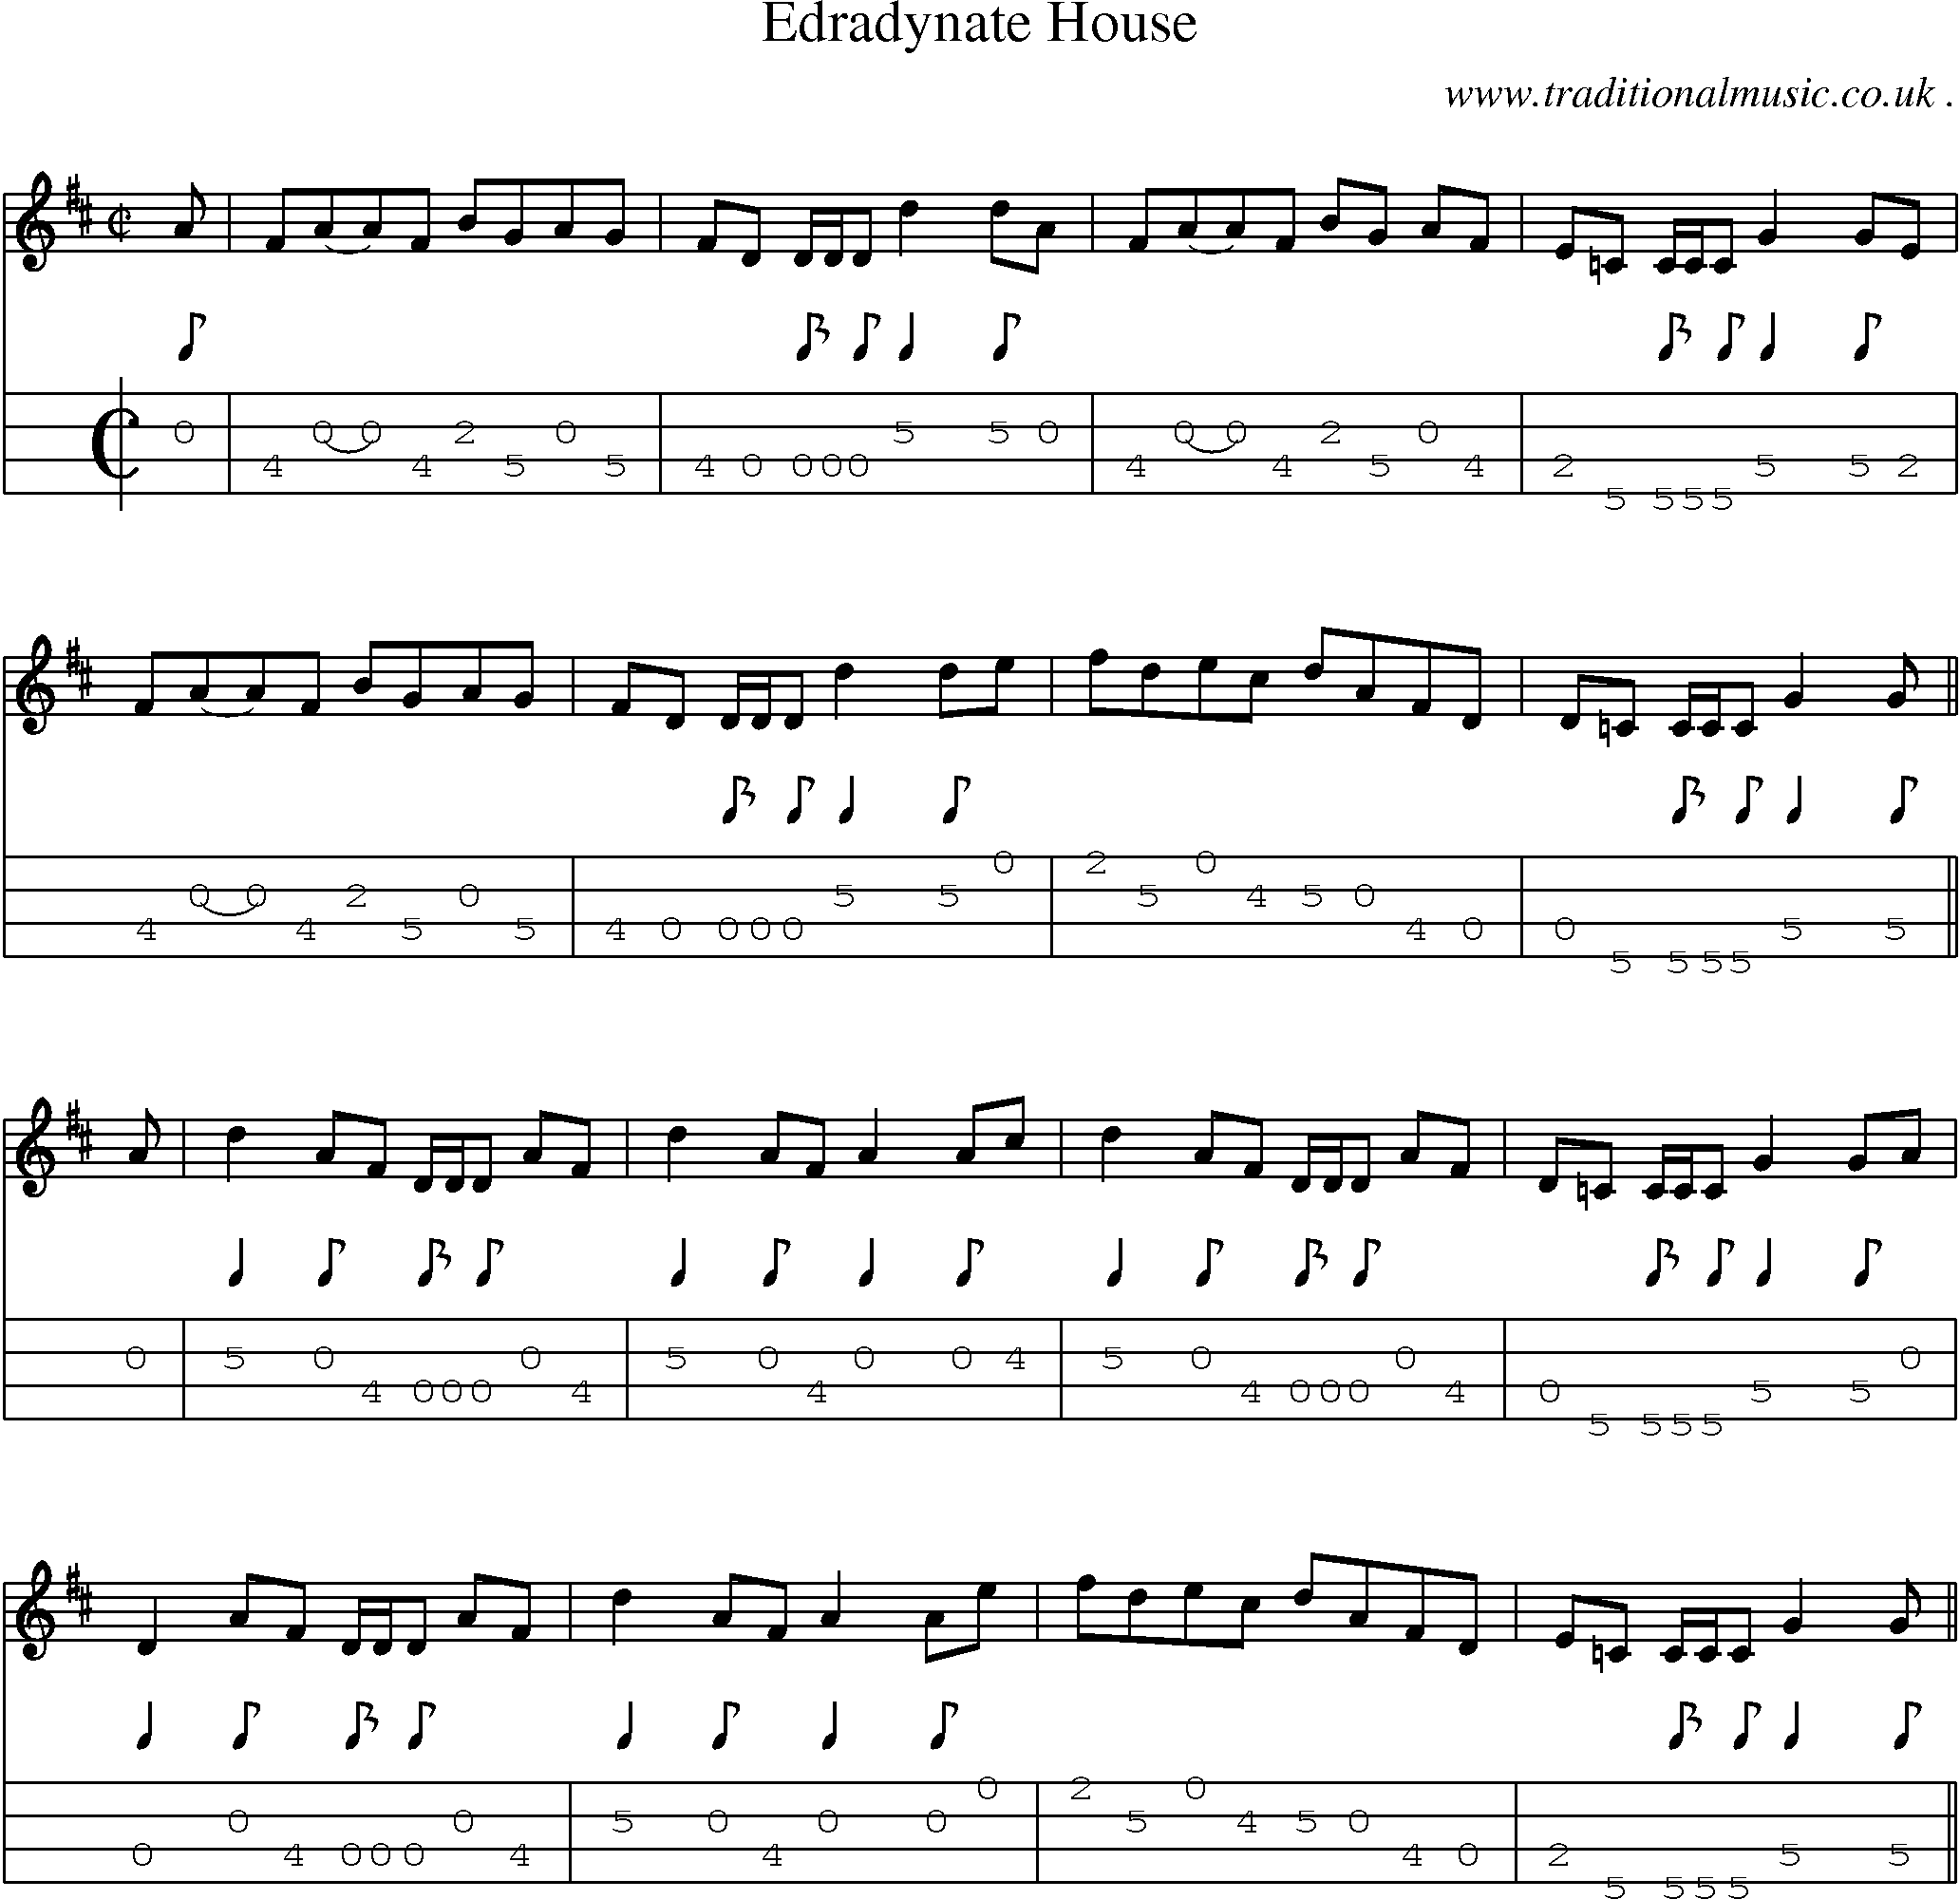 Sheet-music  score, Chords and Mandolin Tabs for Edradynate House